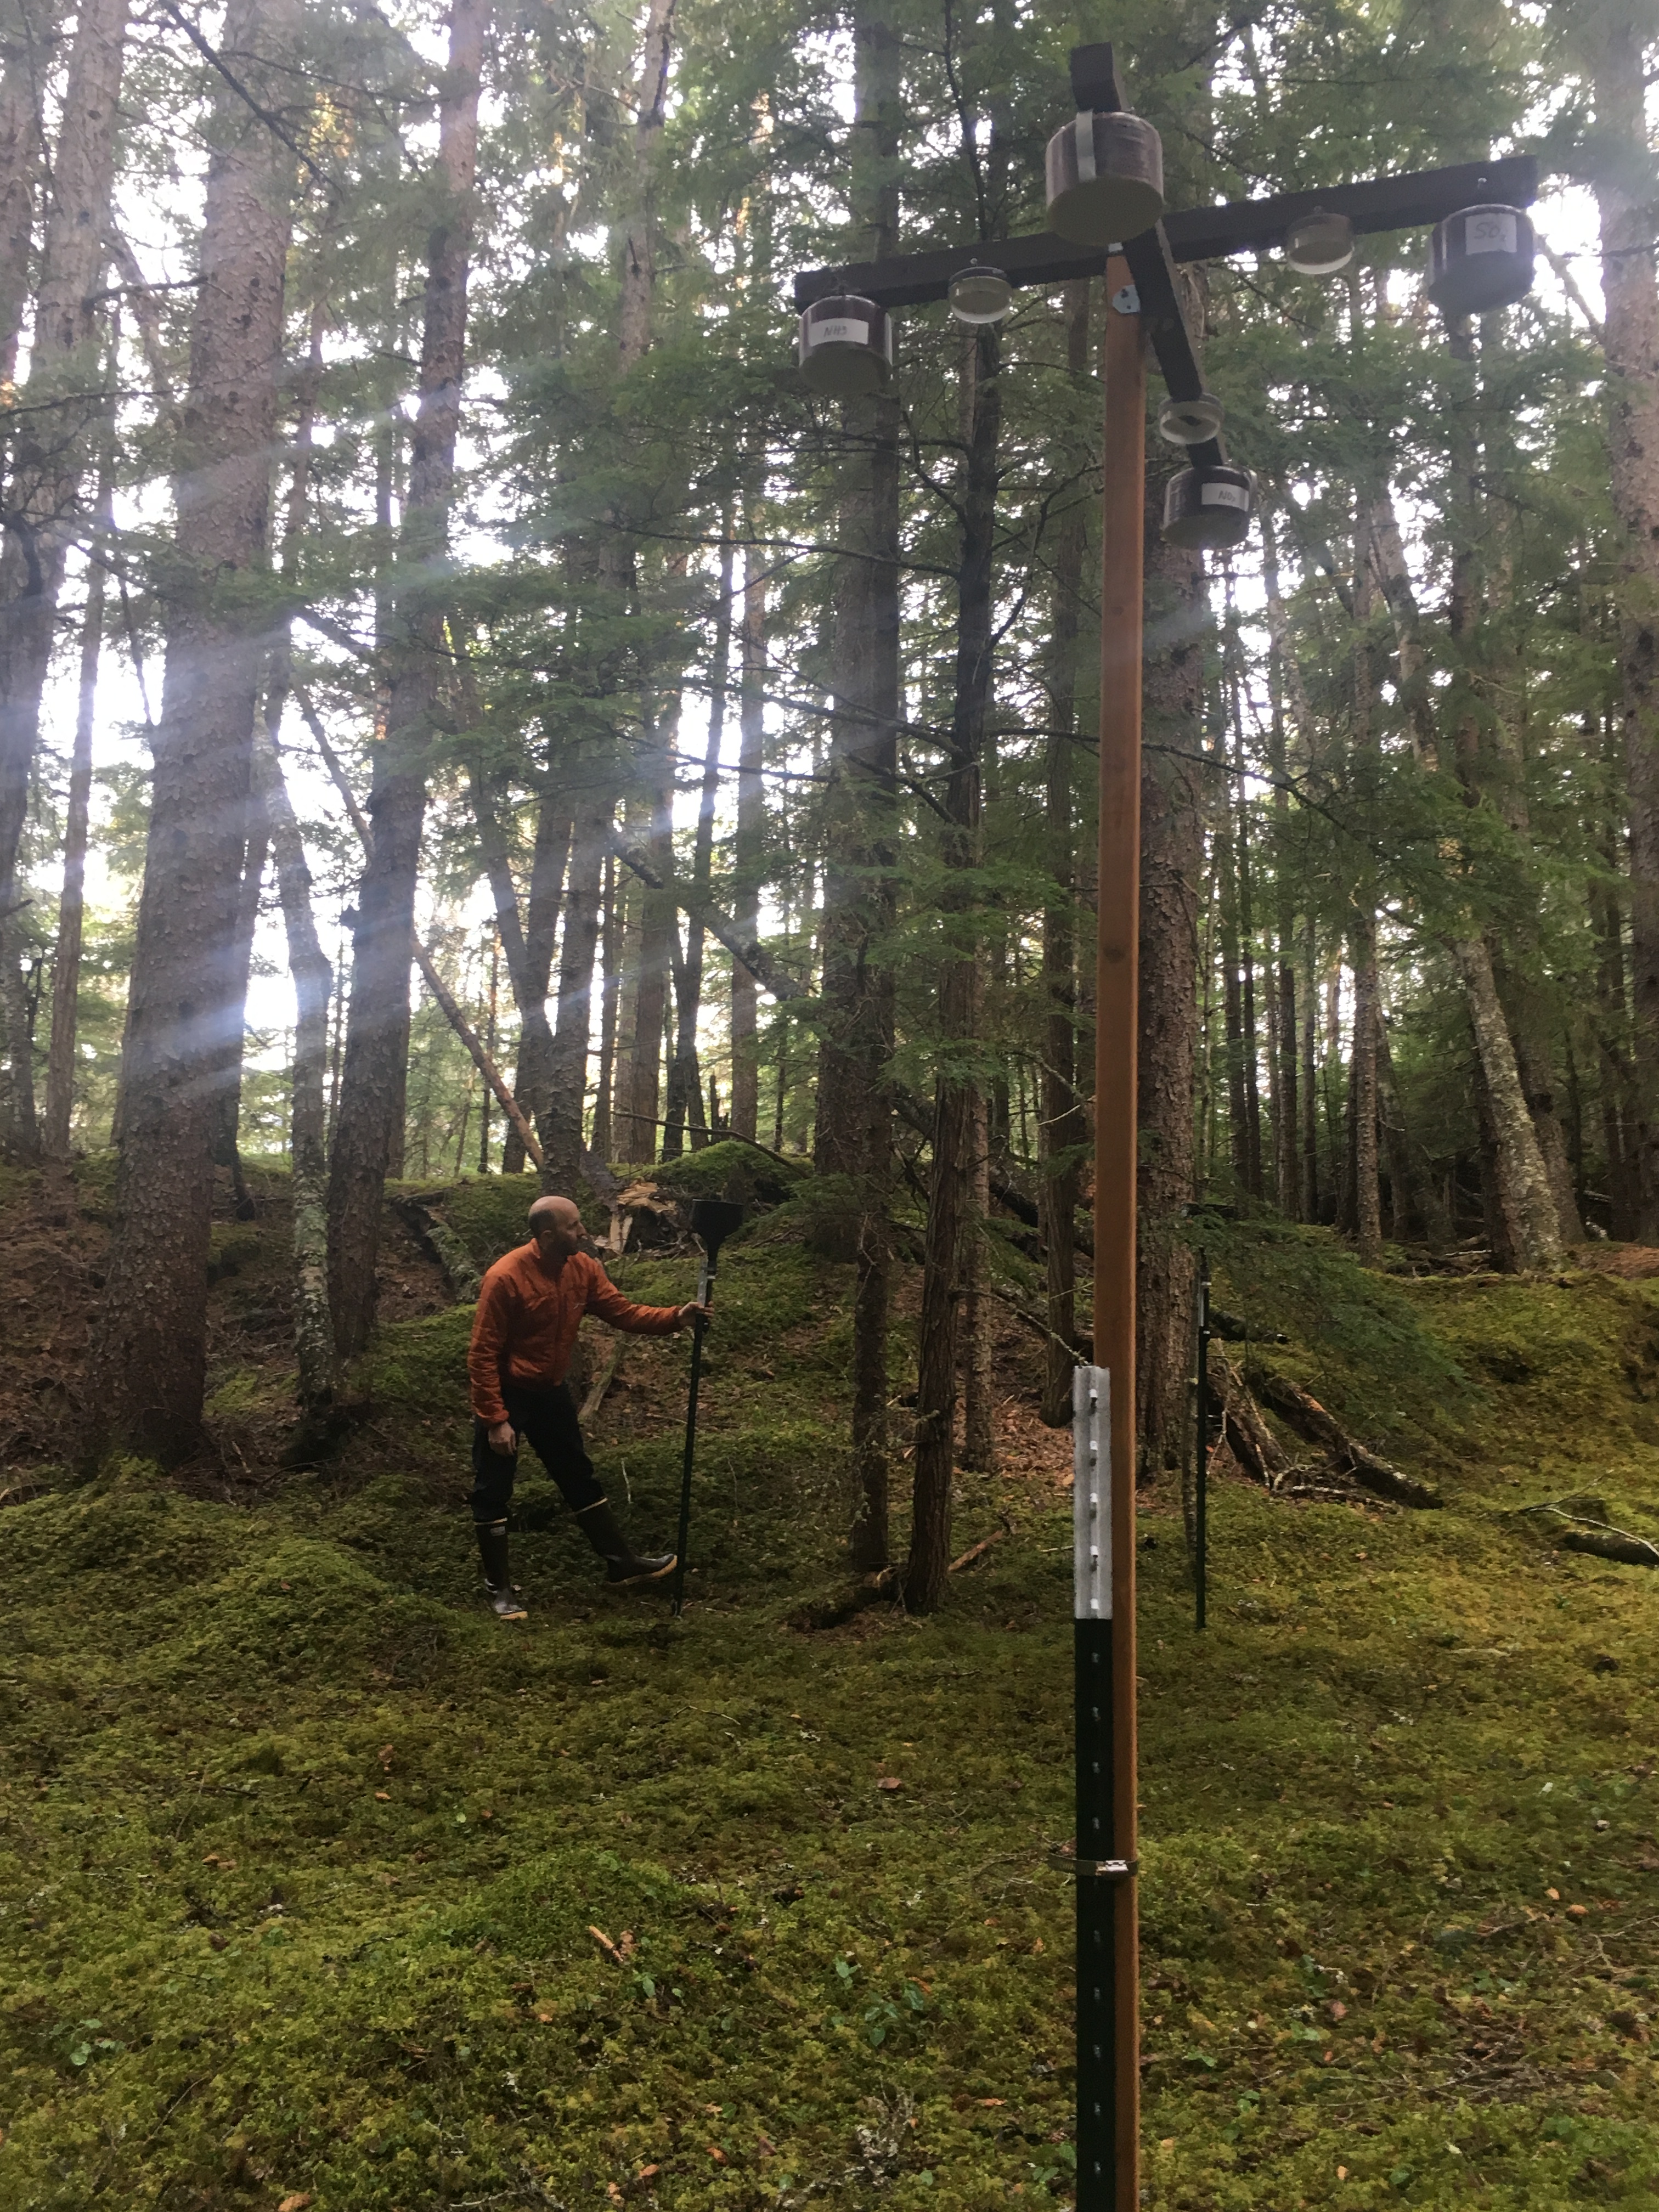 A pole with a cross bars on top holding small round objects in the foreground. Forested backdrop with person holding an instrument.